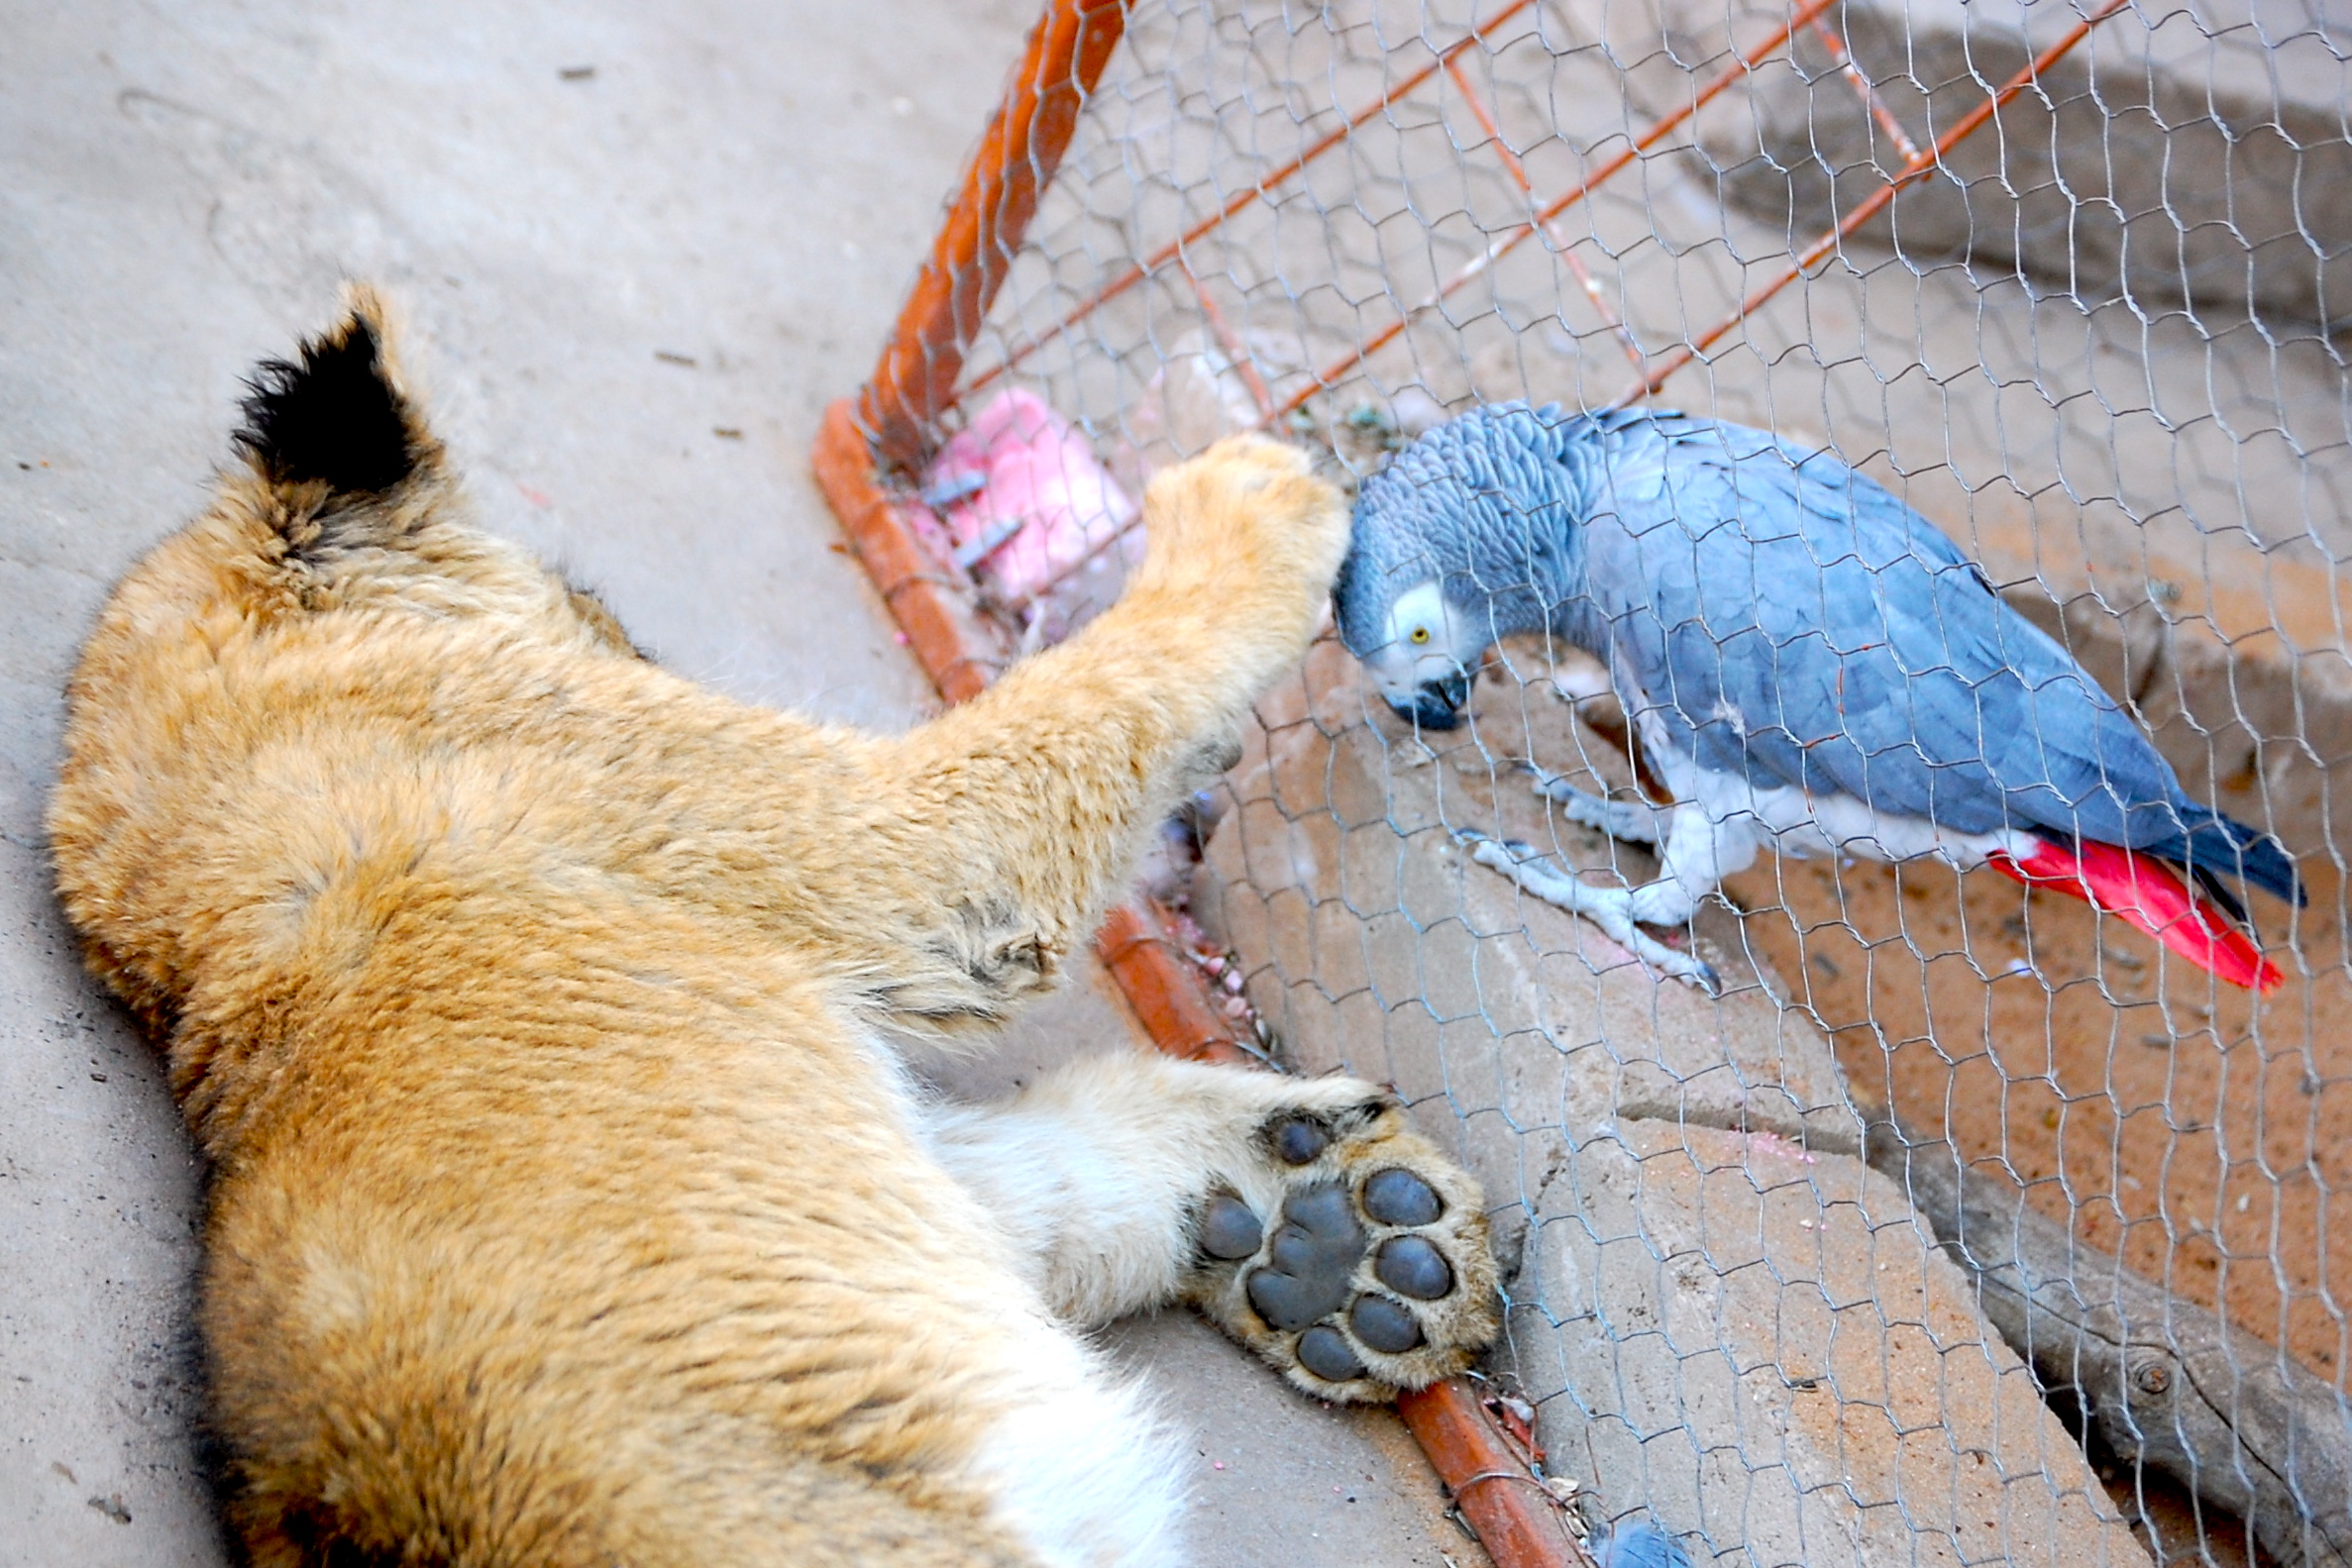  A young lion cub and an African grey parrot greet each other near Gobabis, Namibia 